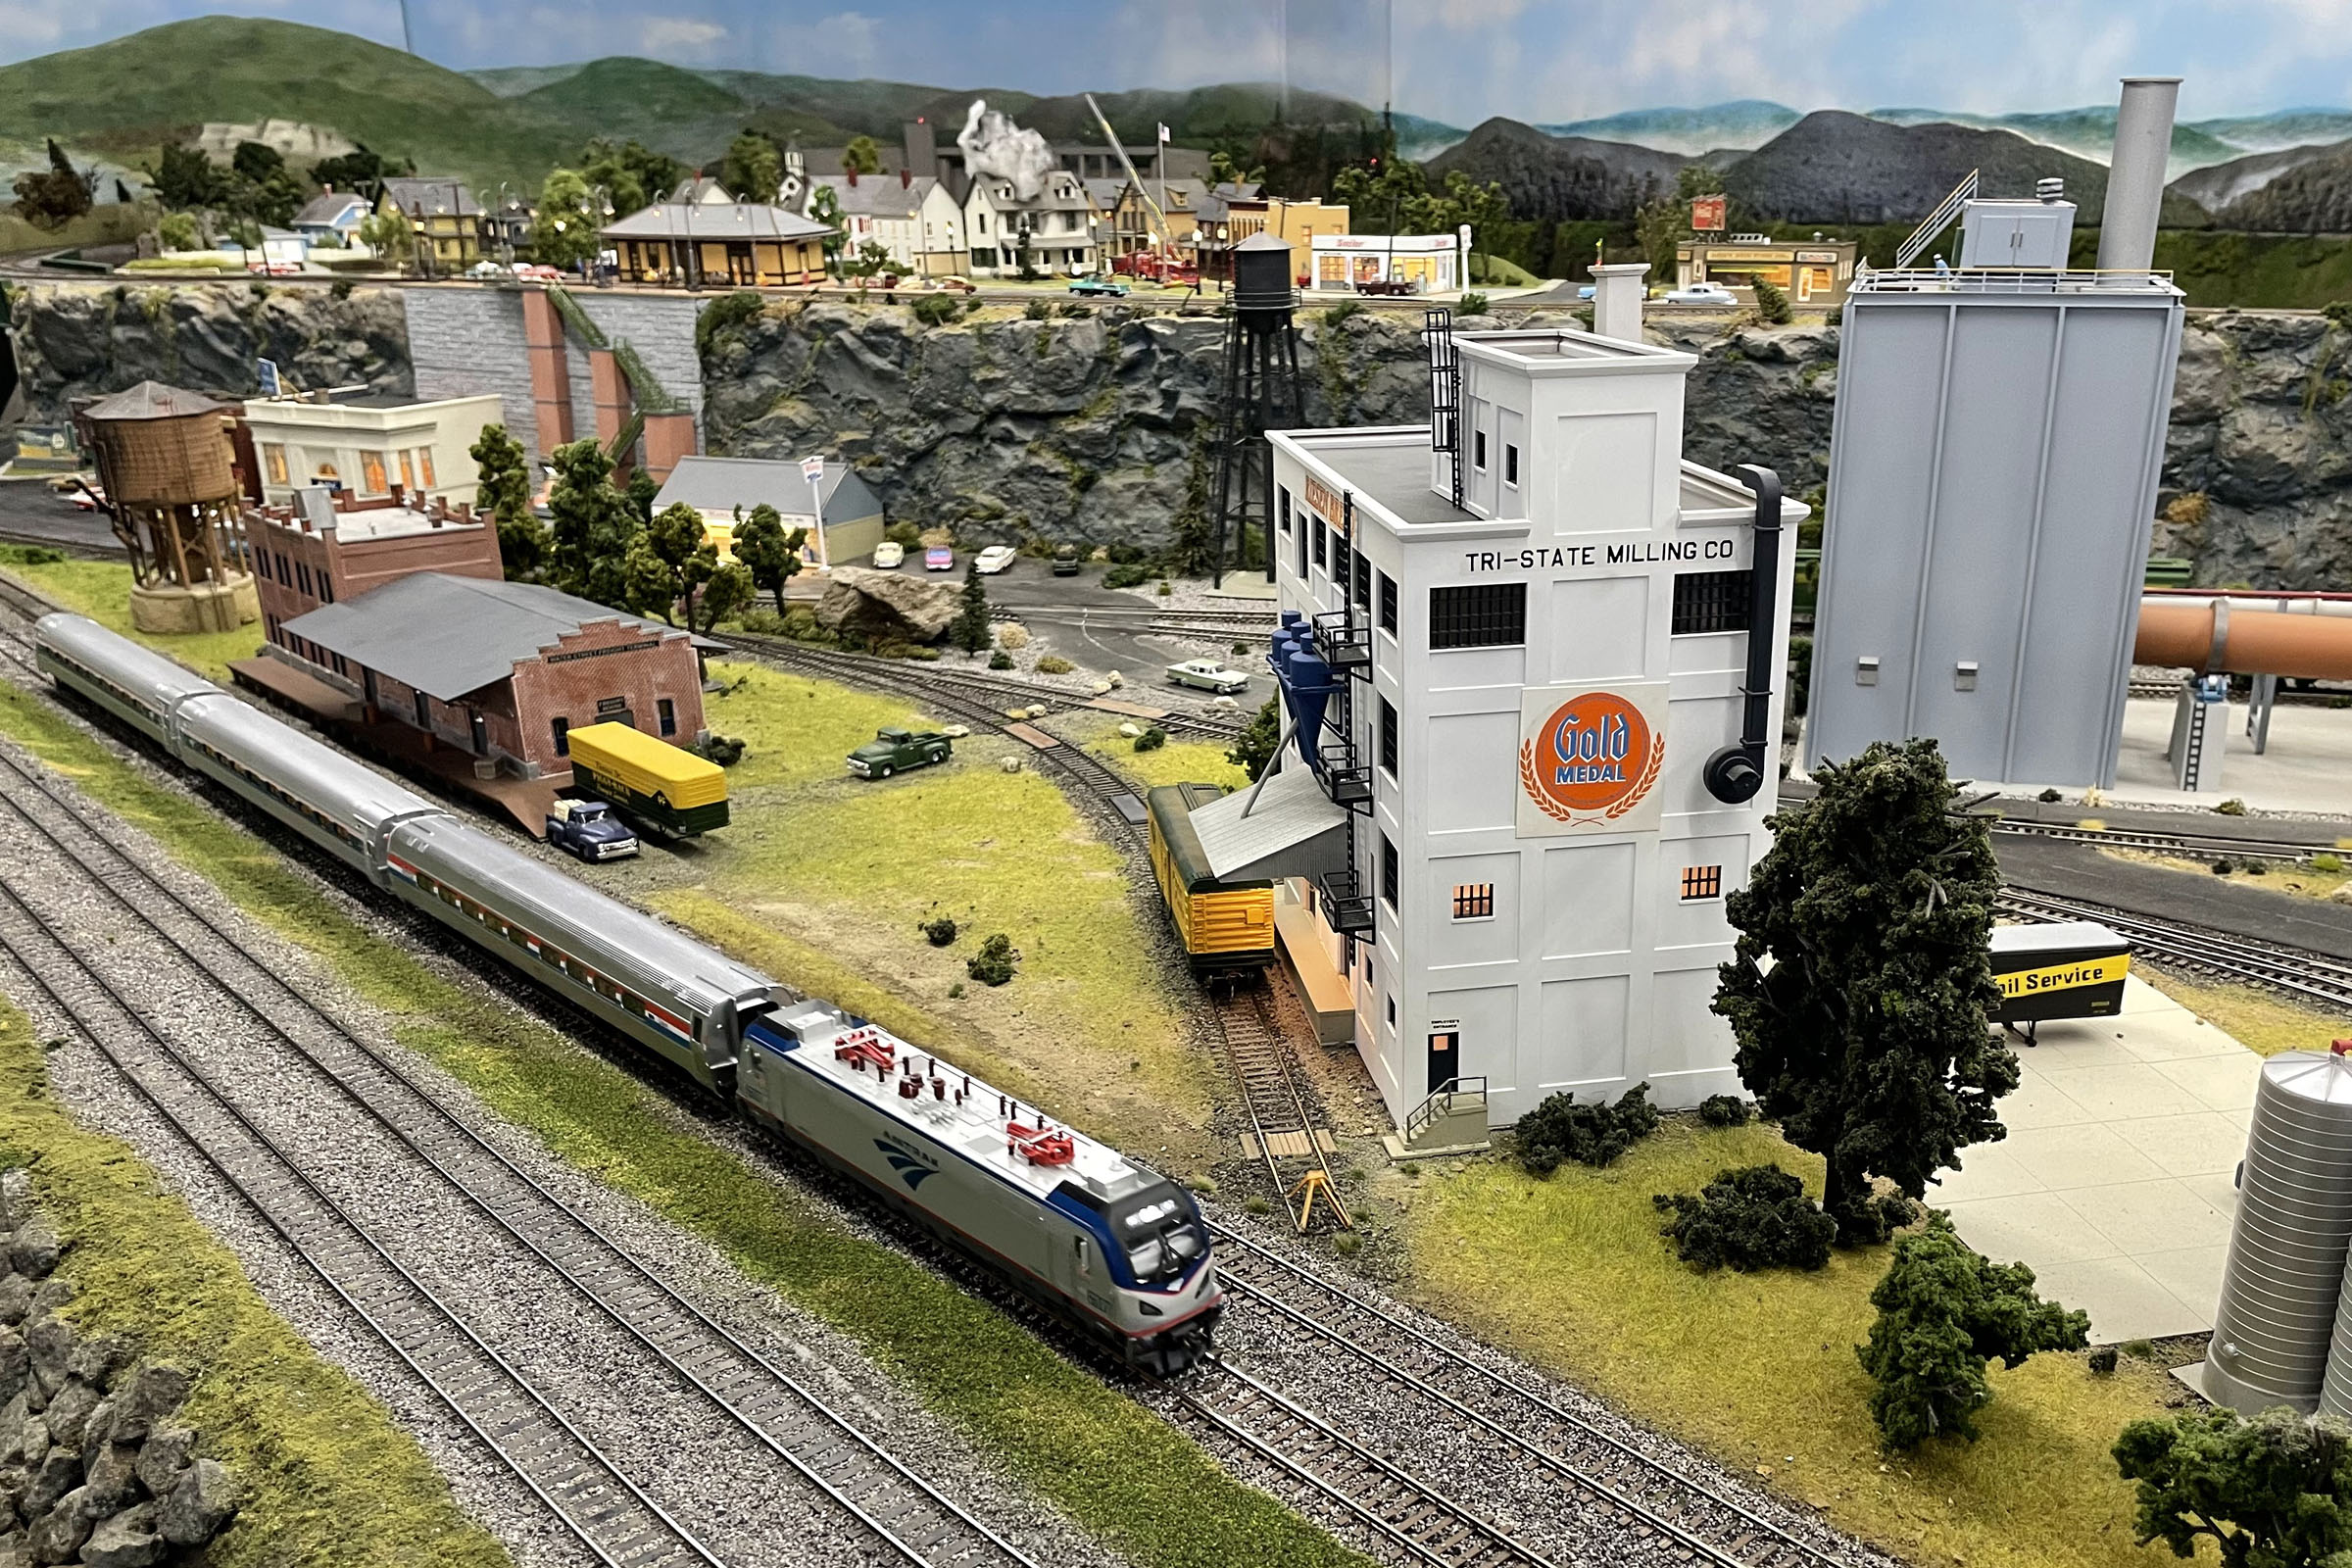 One of America’s largest HO scale model train layouts - The Chelten Hills Model Railroad Club